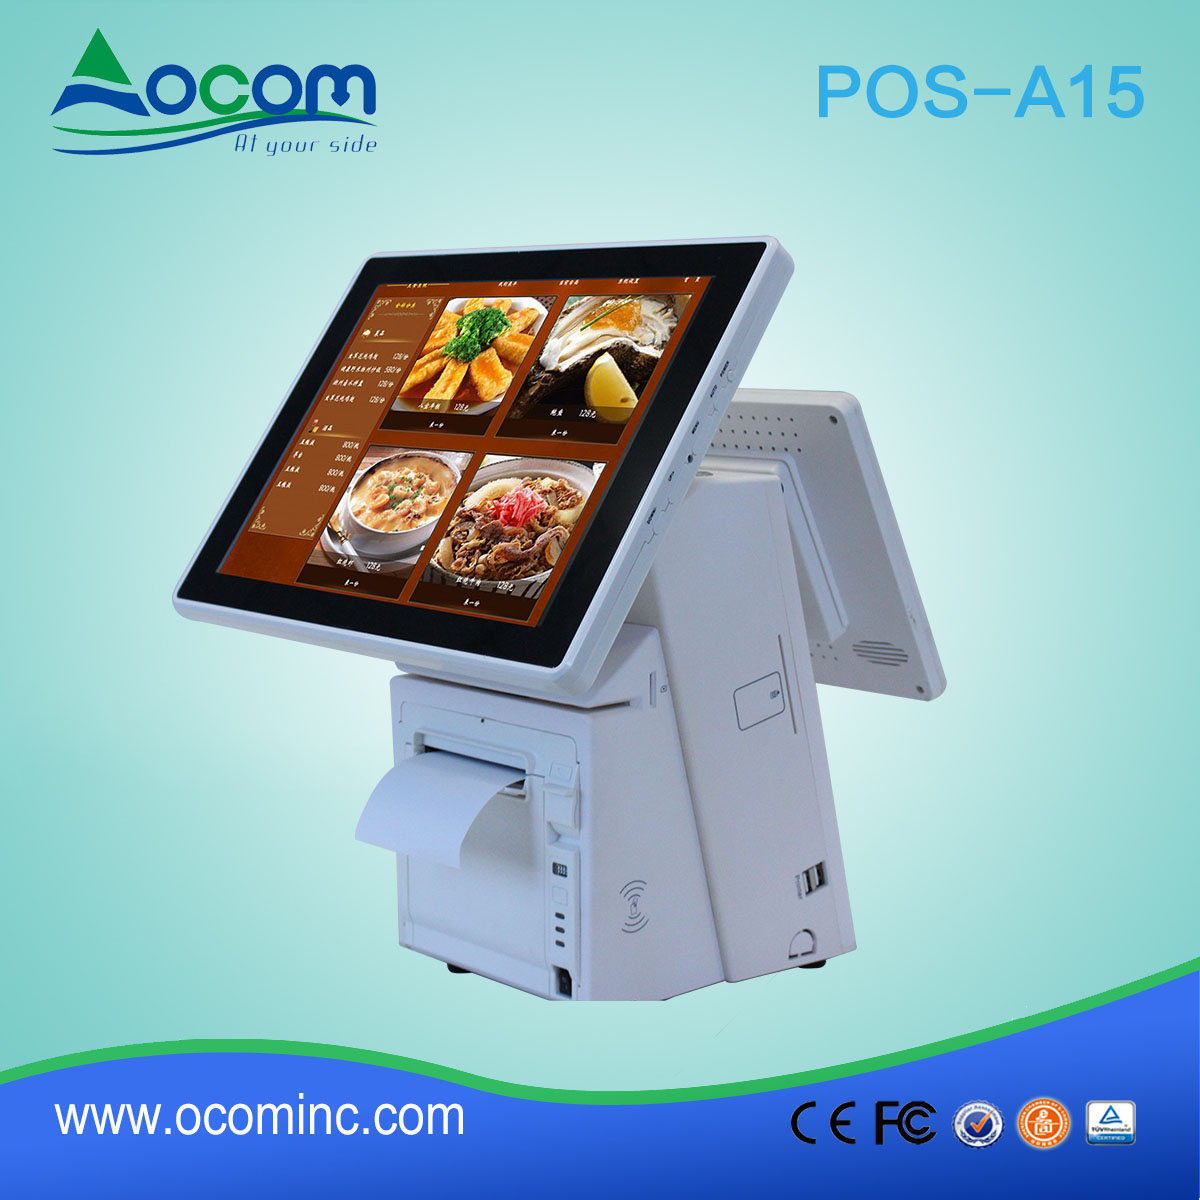 POS-A15---China fabriek gemaakt 15,6" all-in-one pos computer met thermische printer